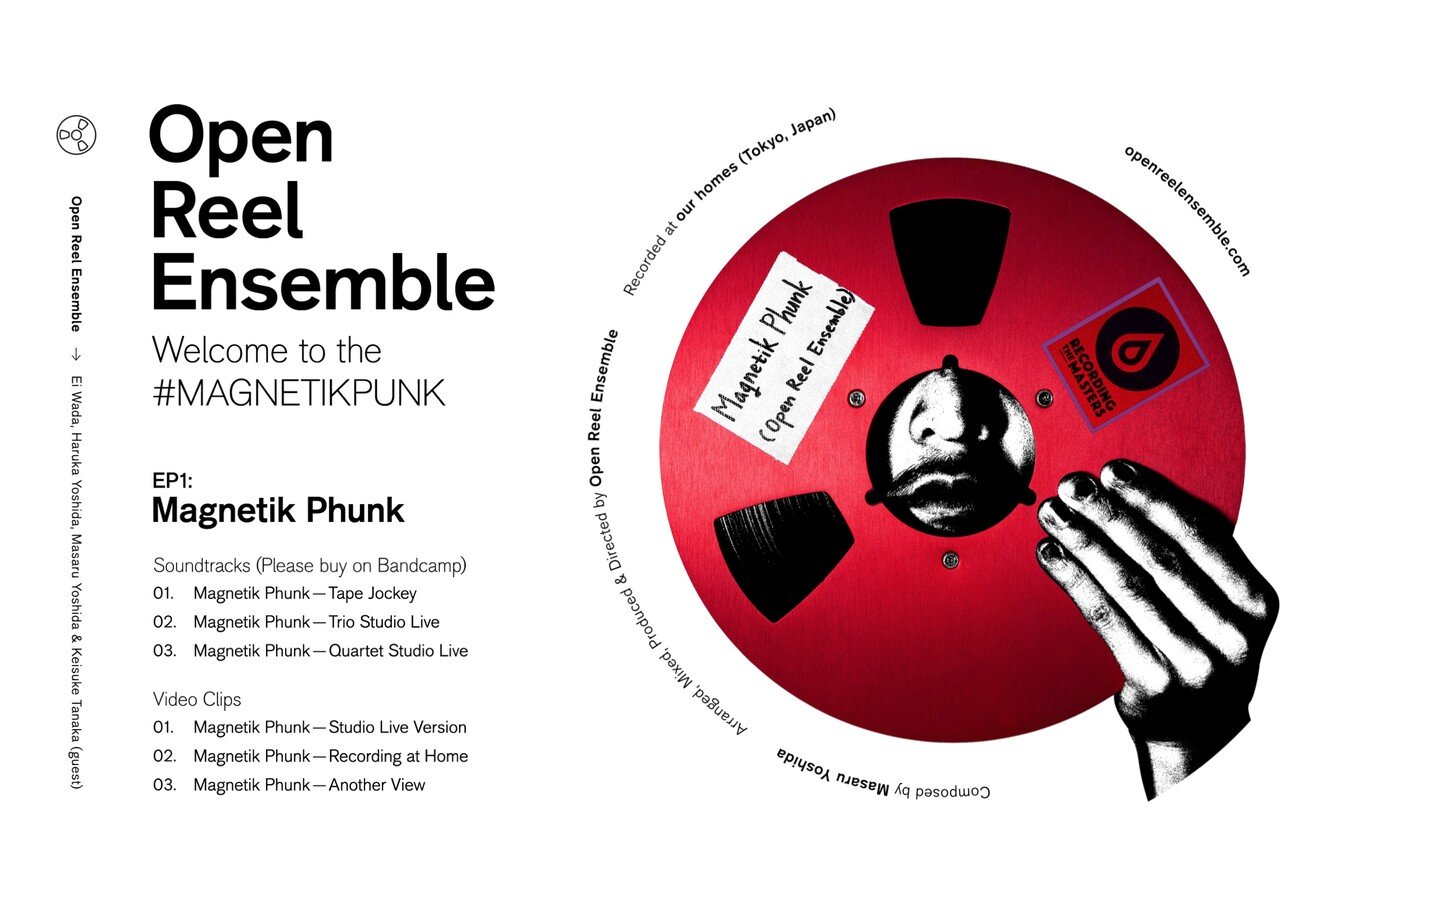 How does Open Reel Ensemble play the tape recorders?
We created a 50-page DIGITAL BOOK containing bonus videos, latest interviews, magnetik fantasy world, and illustrations of playing methods and more.
You can get it on Bandcamp (Streaming + Download